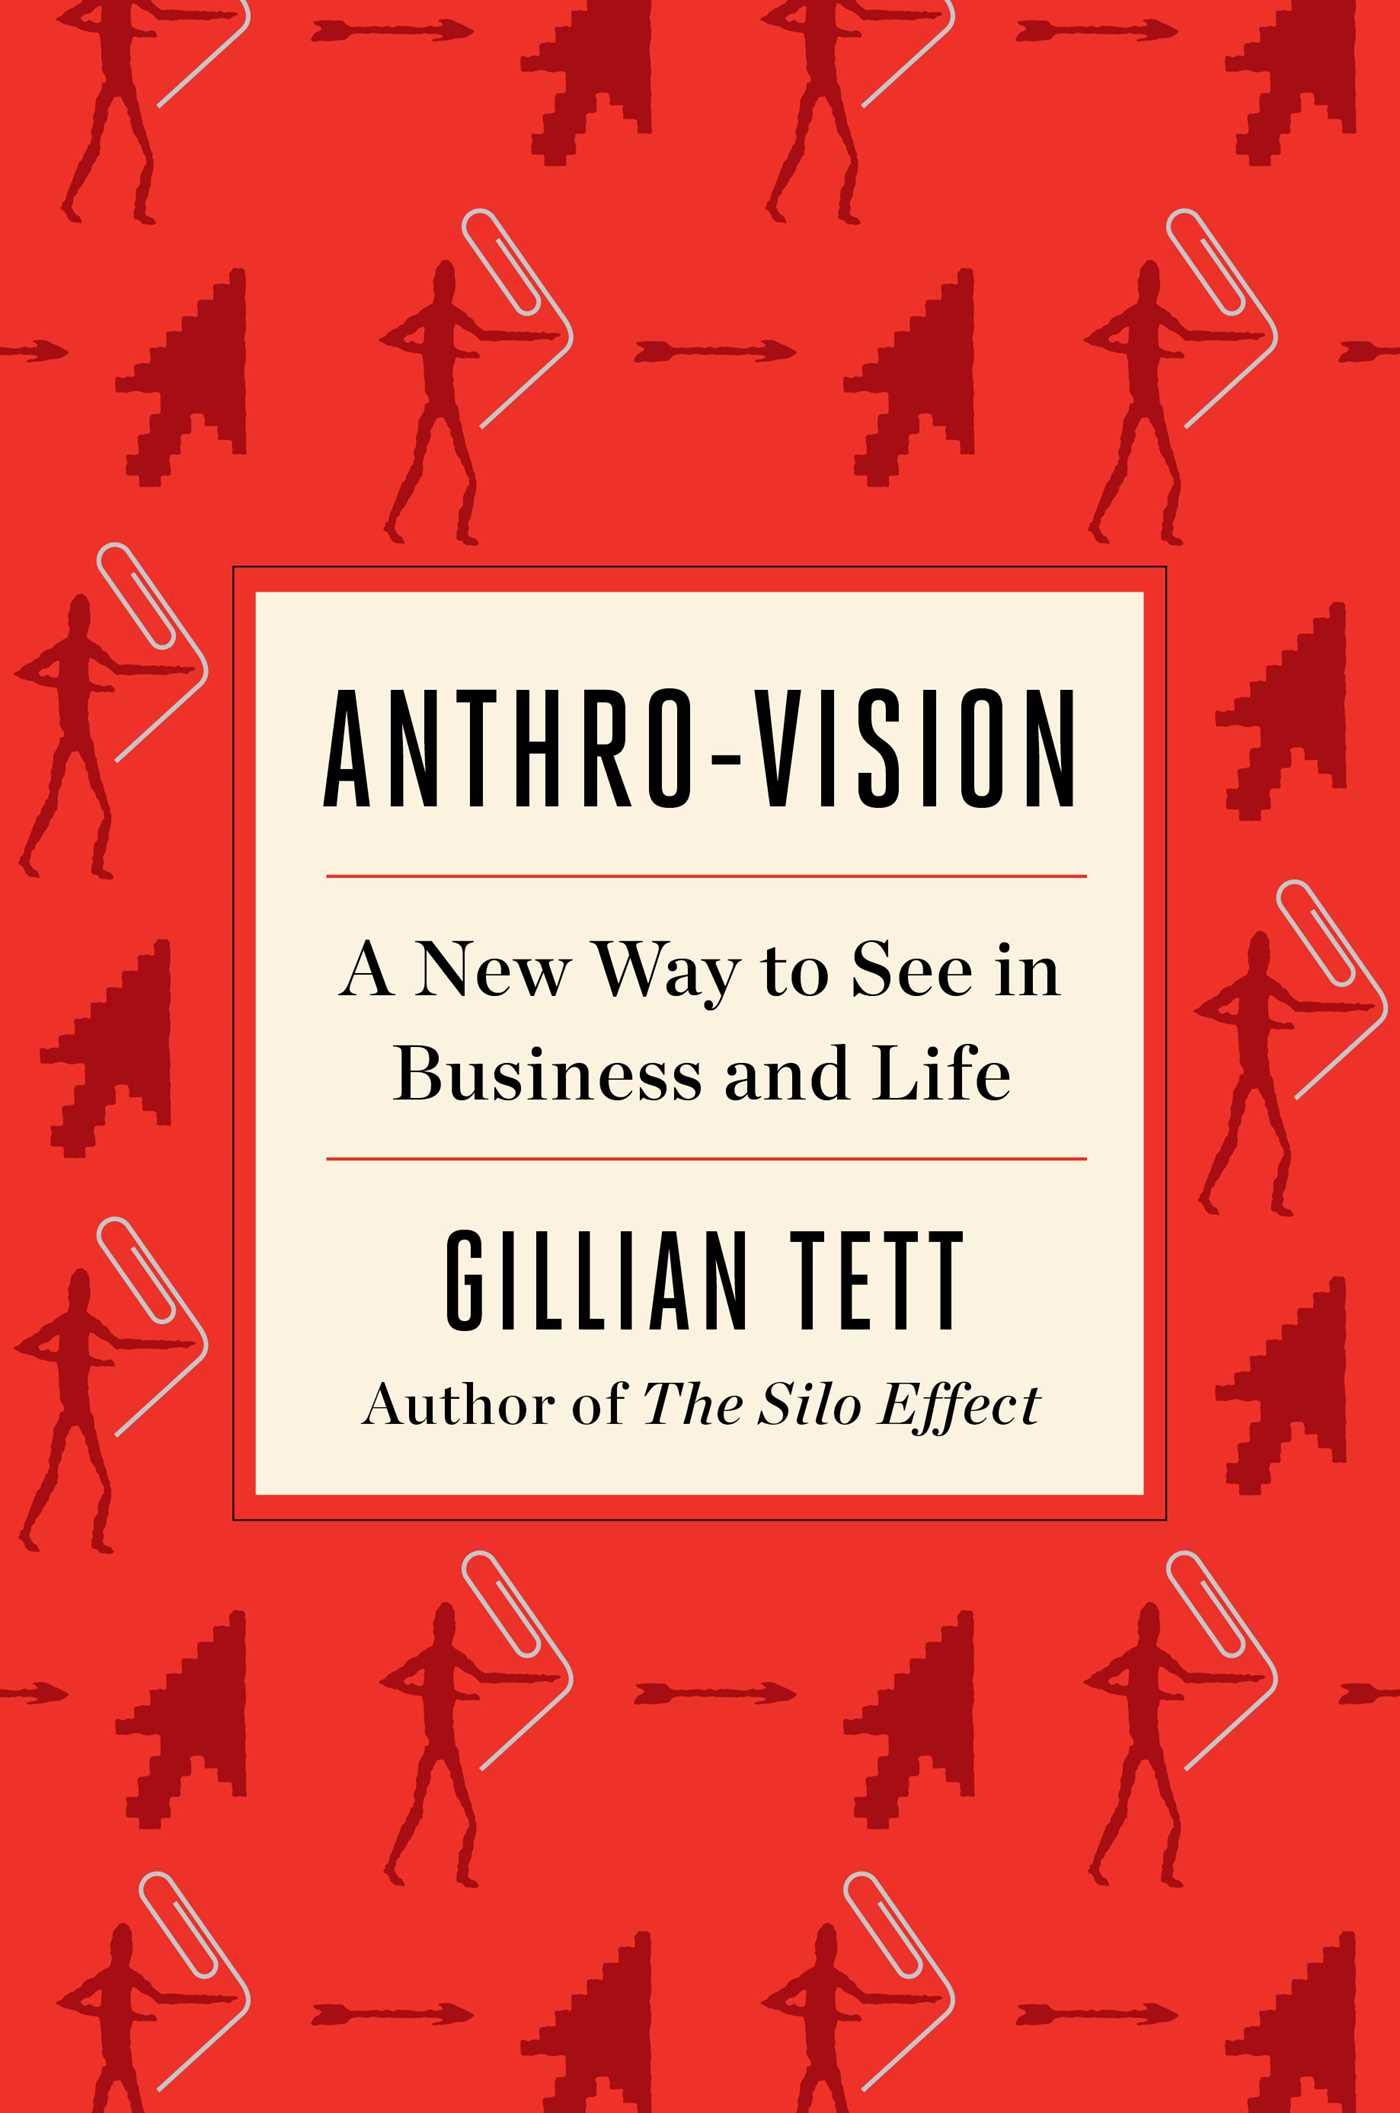 Anthro-Vision: How Anthropology Can Explain Business and Life